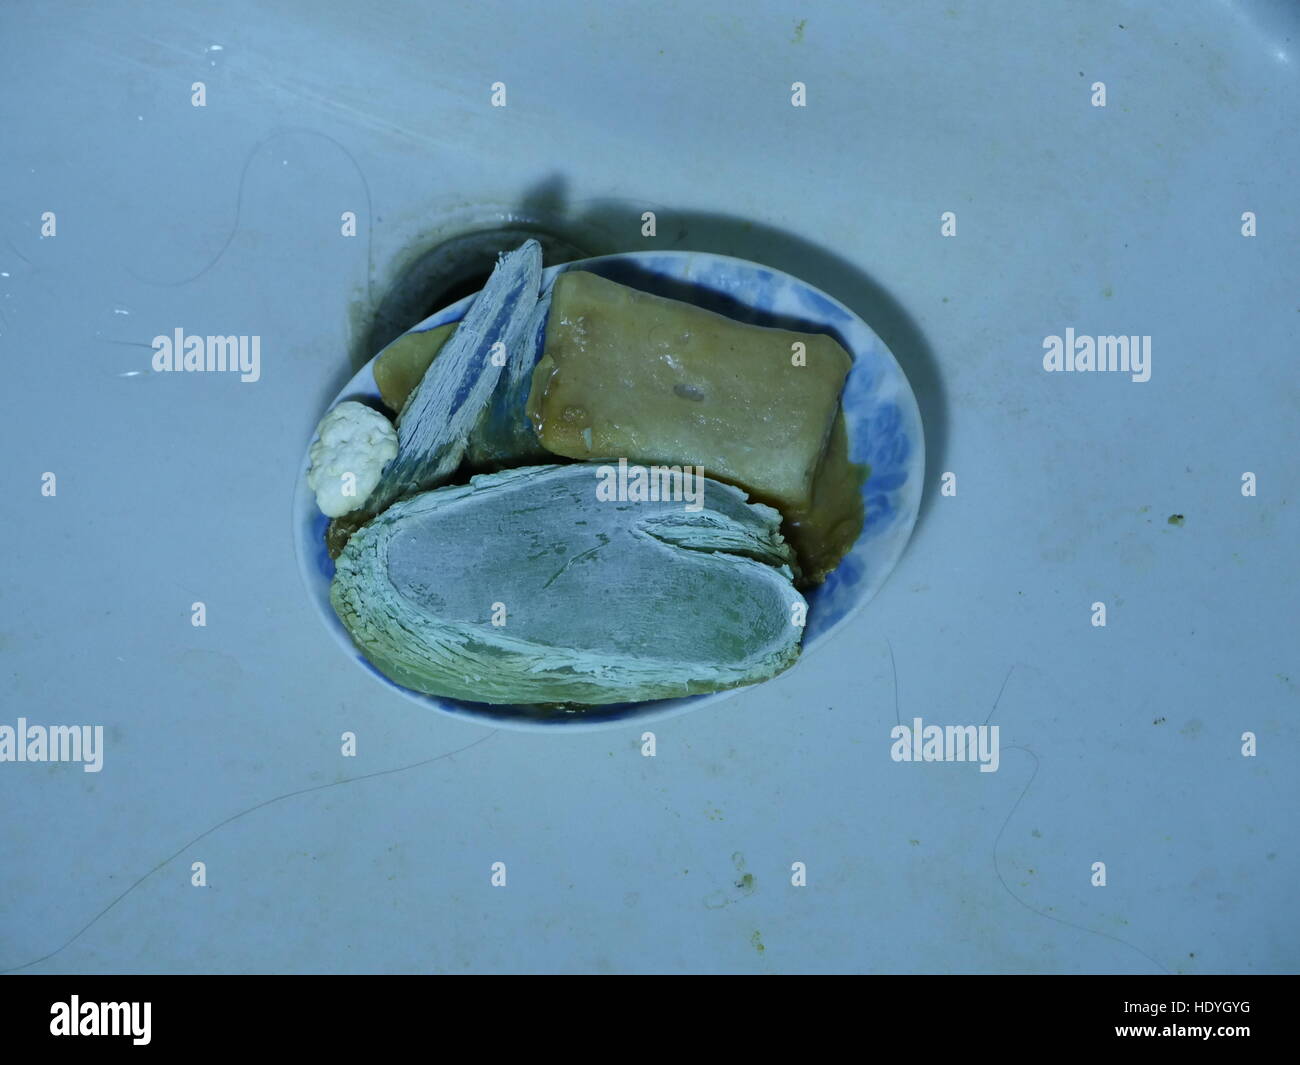 https://c8.alamy.com/comp/HDYGYG/dirty-and-old-soaps-in-a-dirty-sink-HDYGYG.jpg